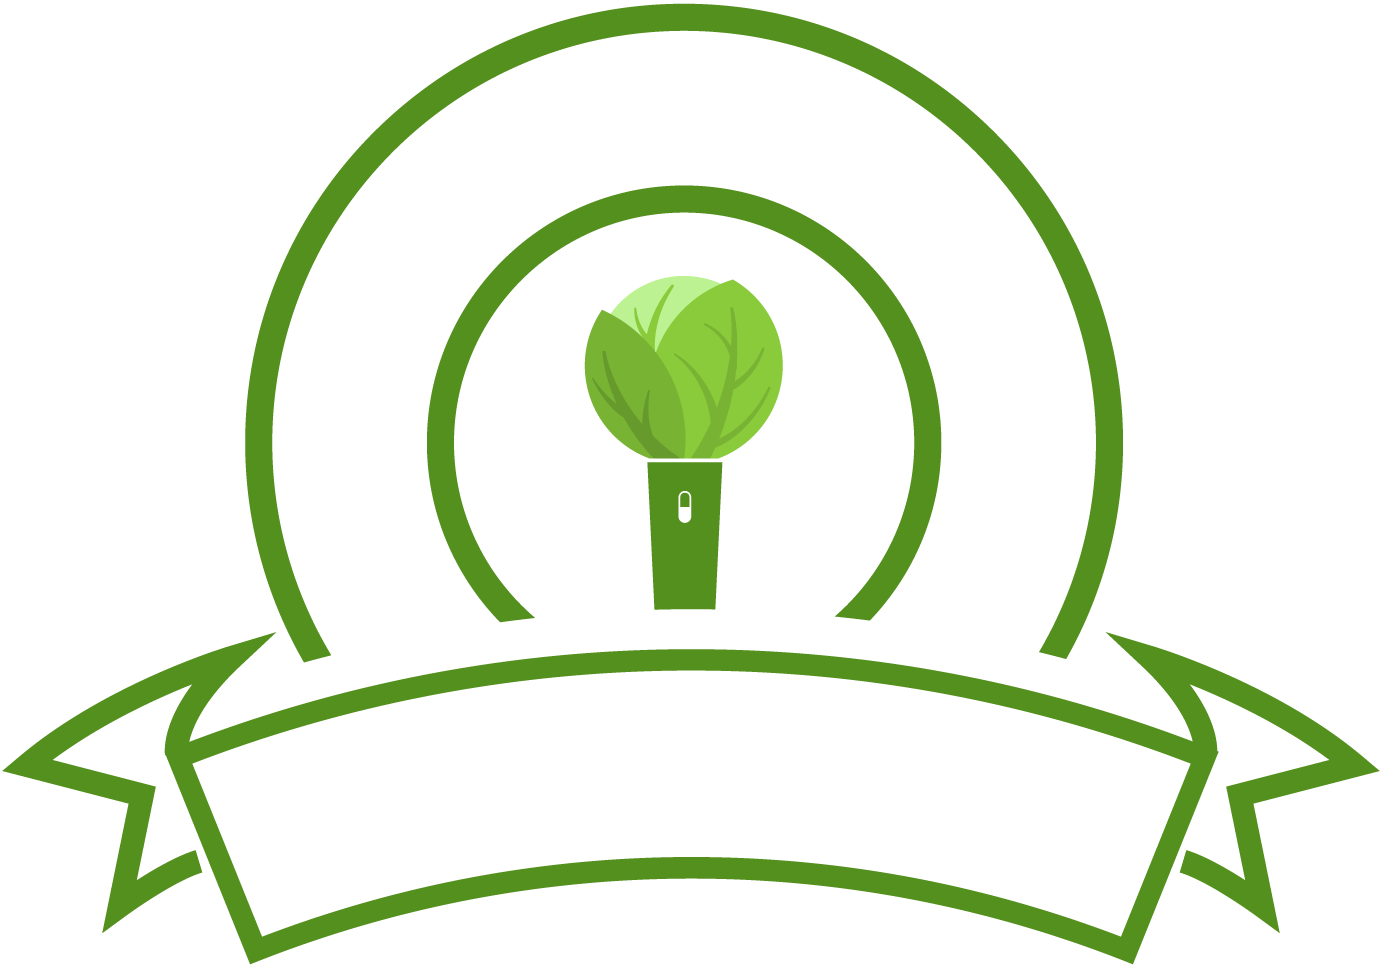 The Cabbage Cart Podcast